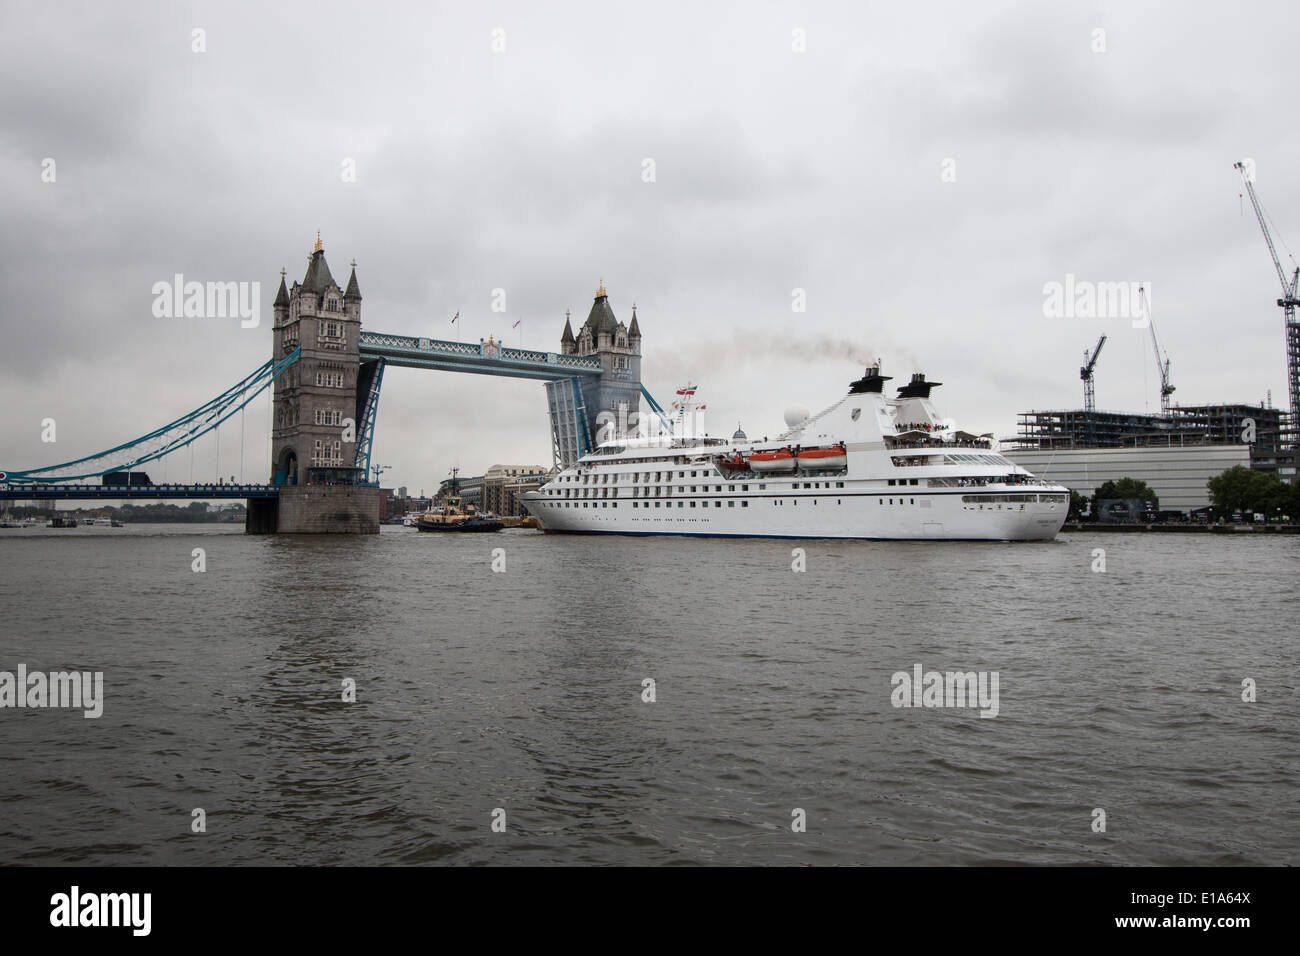 LONDON, UK, 28th May, 2014. The cruise ship Seabourn Legend passes through Tower Bridge on its way to moor alongside HMS Belfast on the Thames © Steve Bright/Alamy Live News Stock Photo